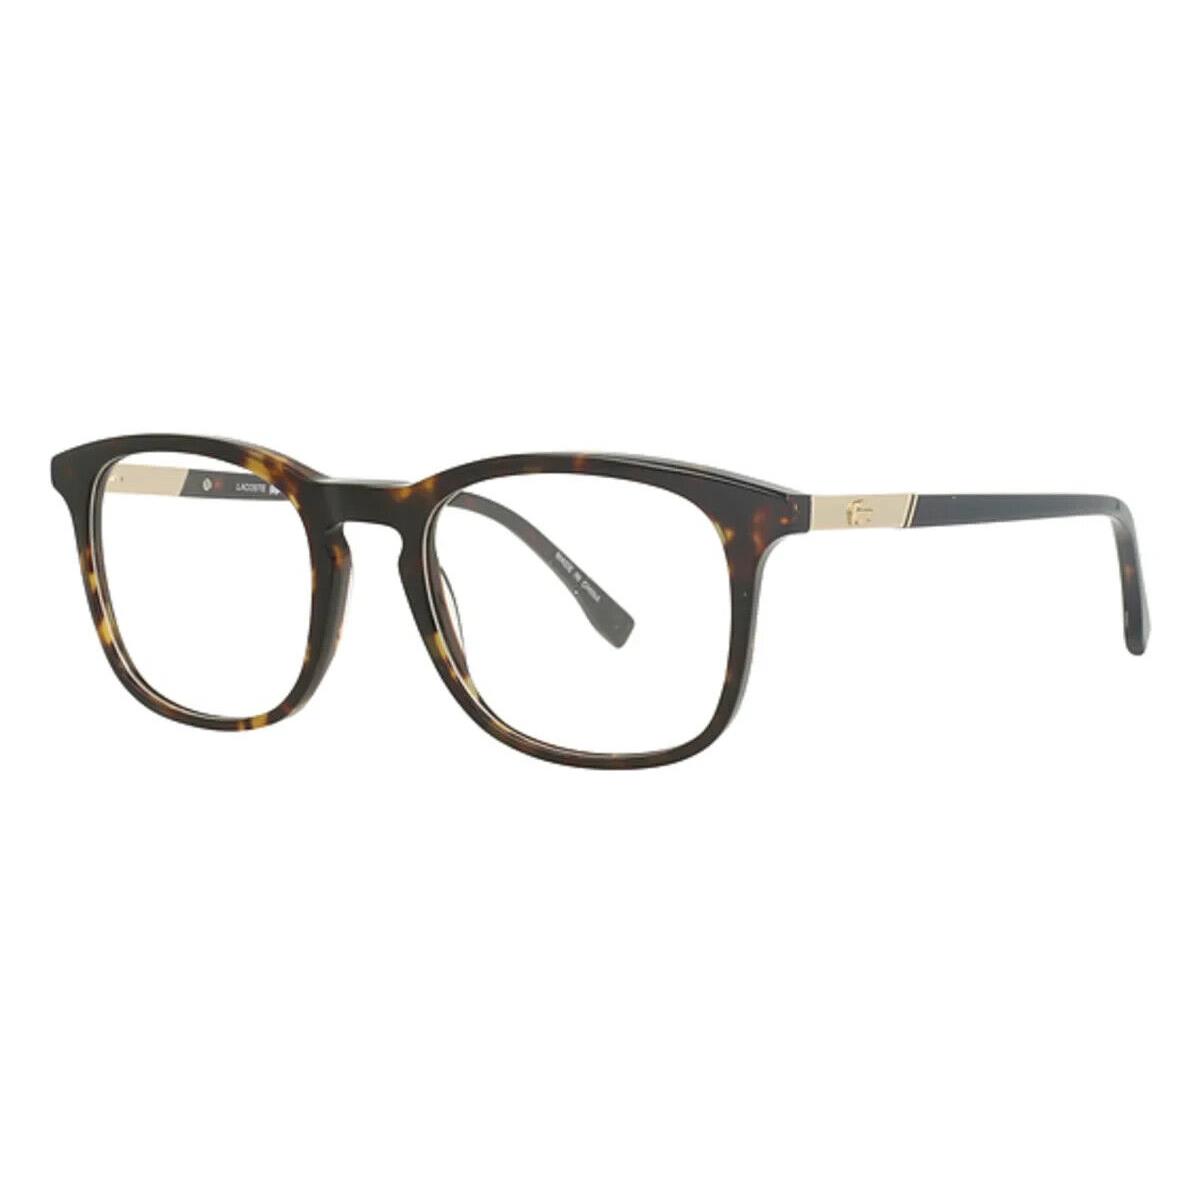 Lacoste L2889 230 52mm Brown Tortoise and Gold Rectangle Unisex Eyeglasses